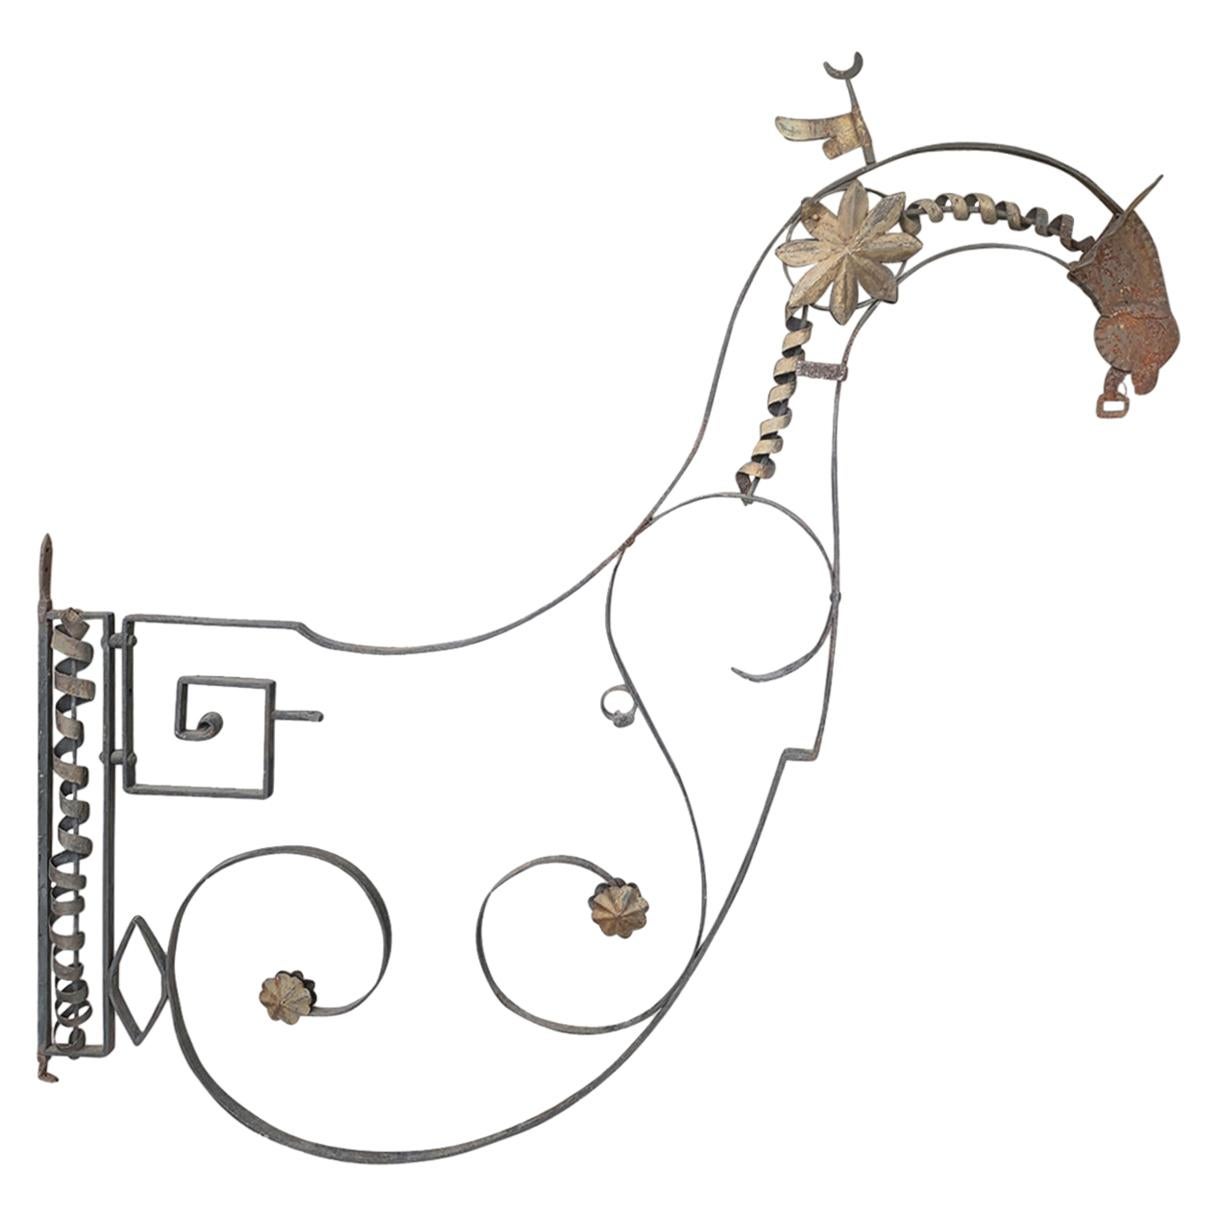 19th-20th Century French Wrought Iron Rooster Architectural Hanging Sign For Sale